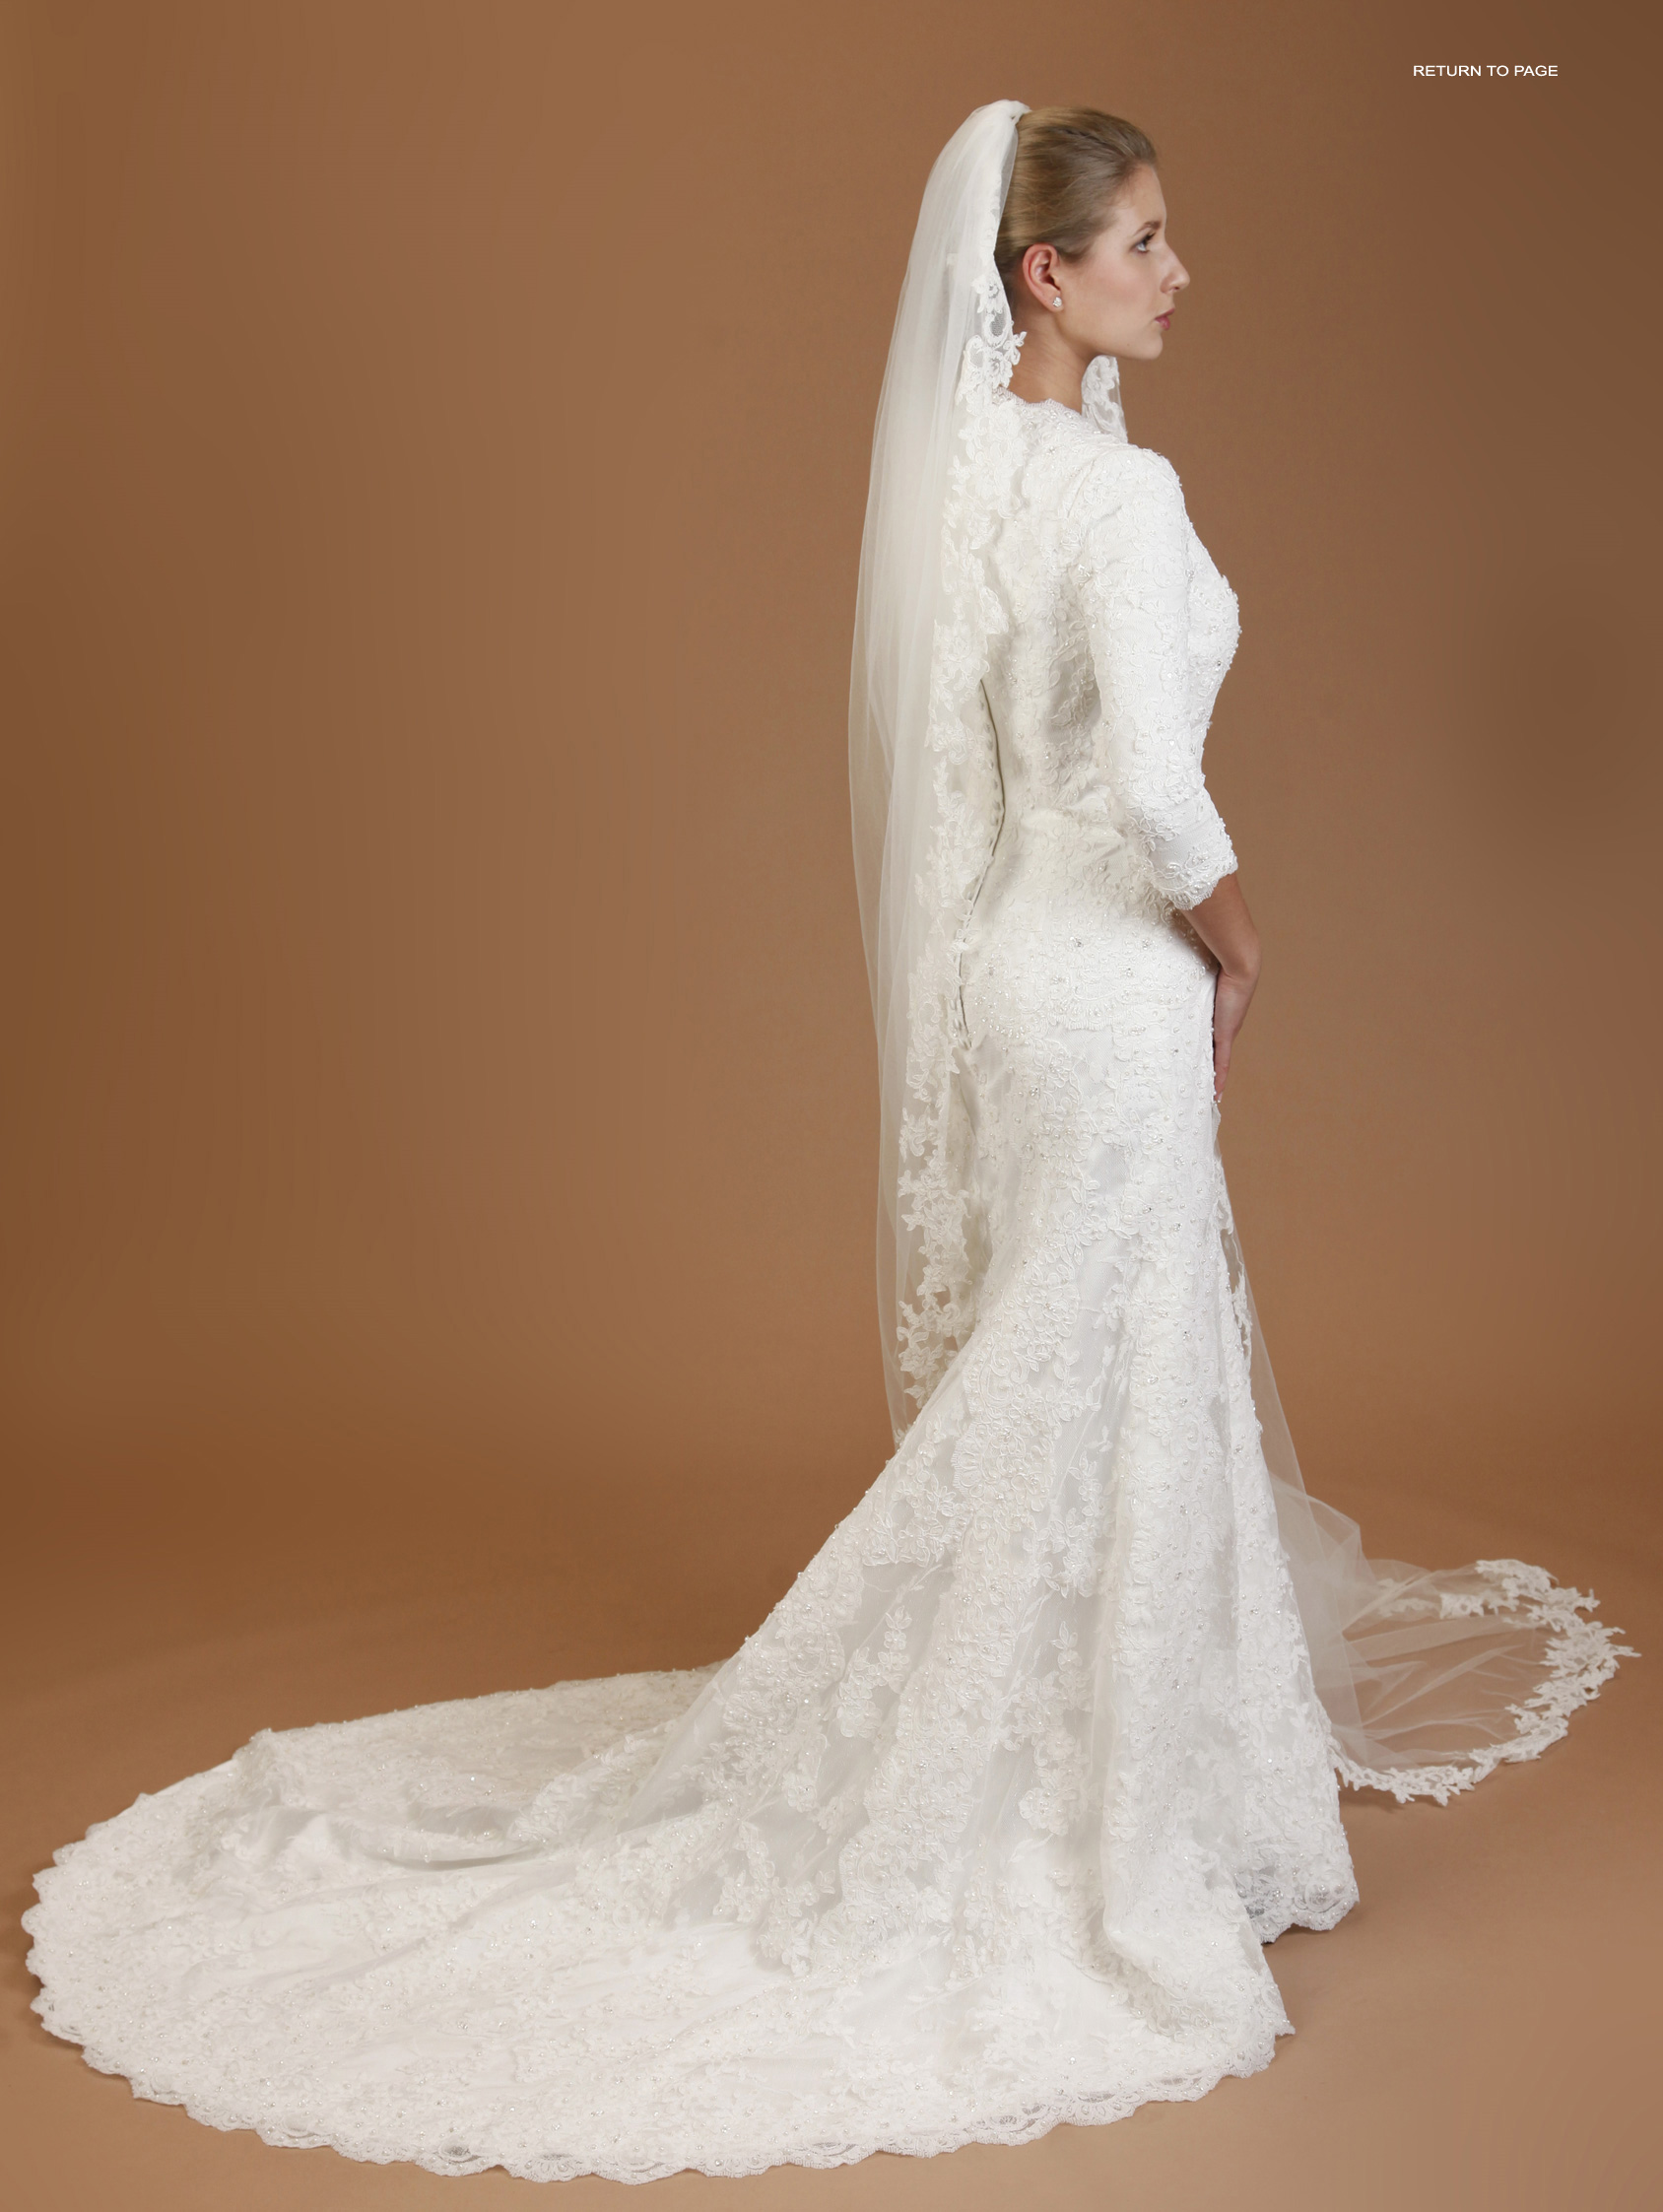 Style 102 - Sparkling, beaded elegance on fine lace, appliqud over lace net, satin underneath, reminiscent of the finery of Spanish princesses, 3/4 sleeves lined with comfortable stretch fabric, 3/8 inch covered buttons travel down the length of the zipper, medium train, trimmed with intricate, scalloped lace